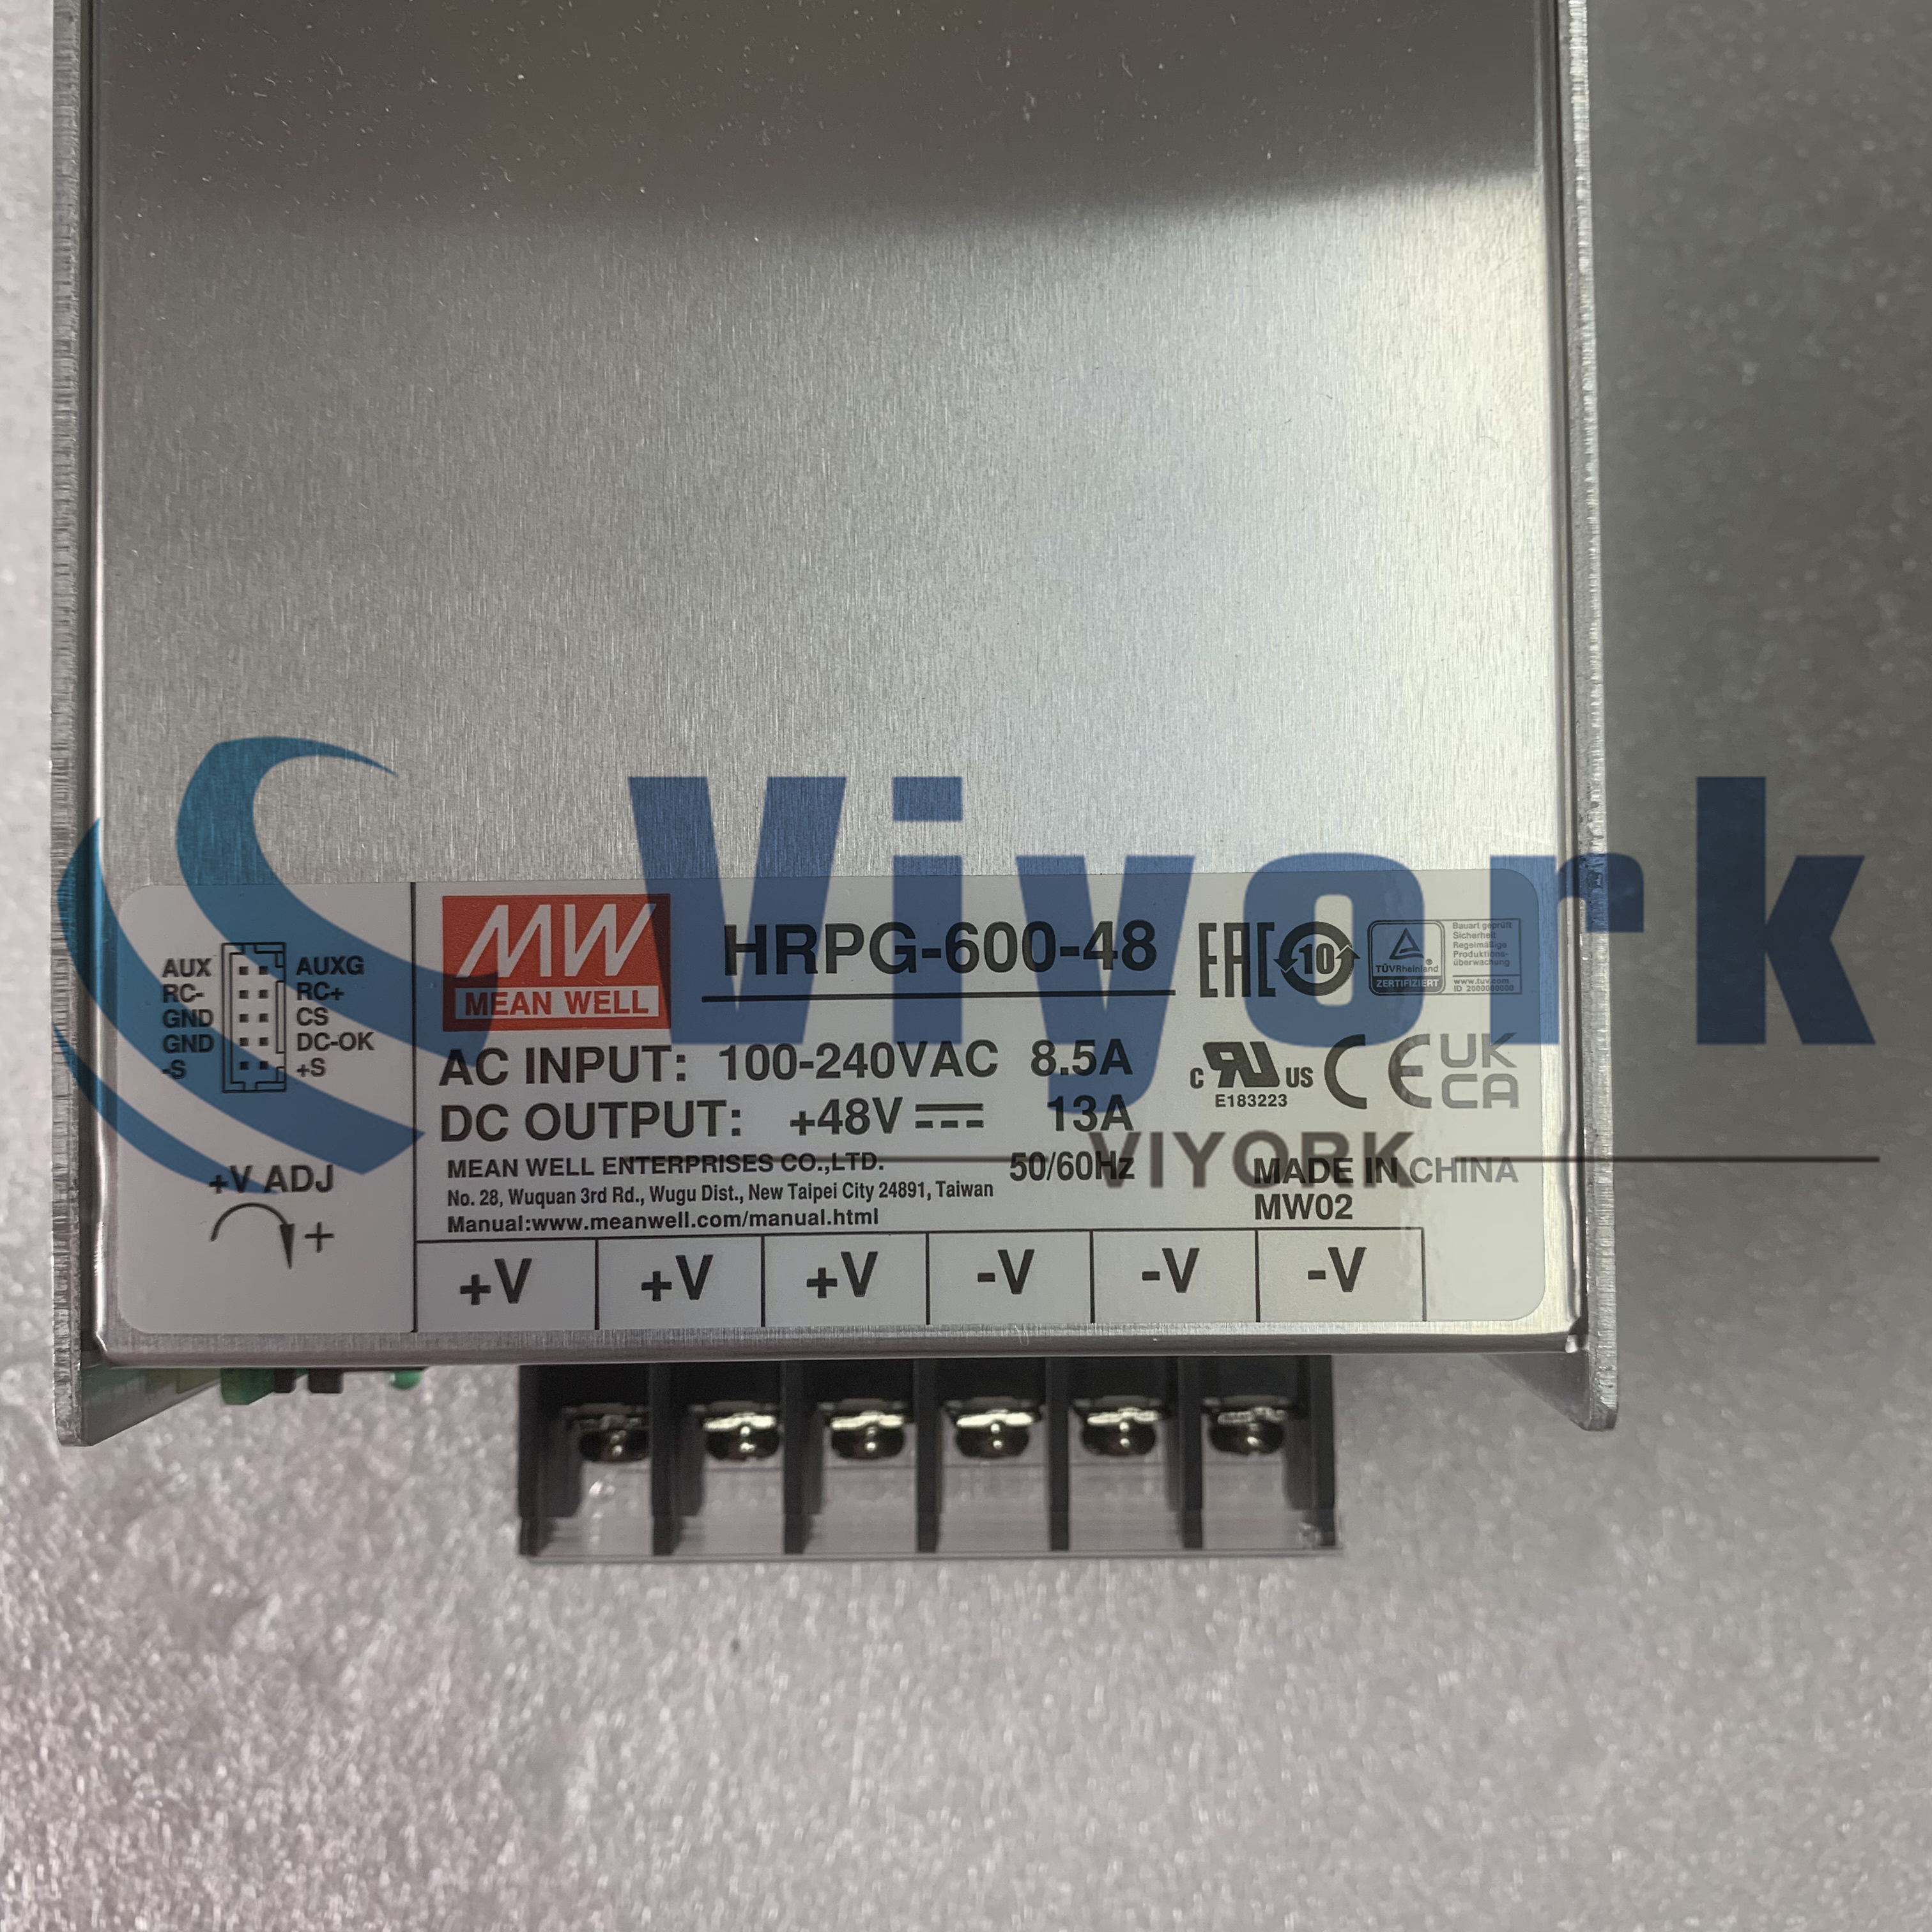 MEAN WELL HRPG-600-48 AC-DC ENCLOSED - G5 SERIES